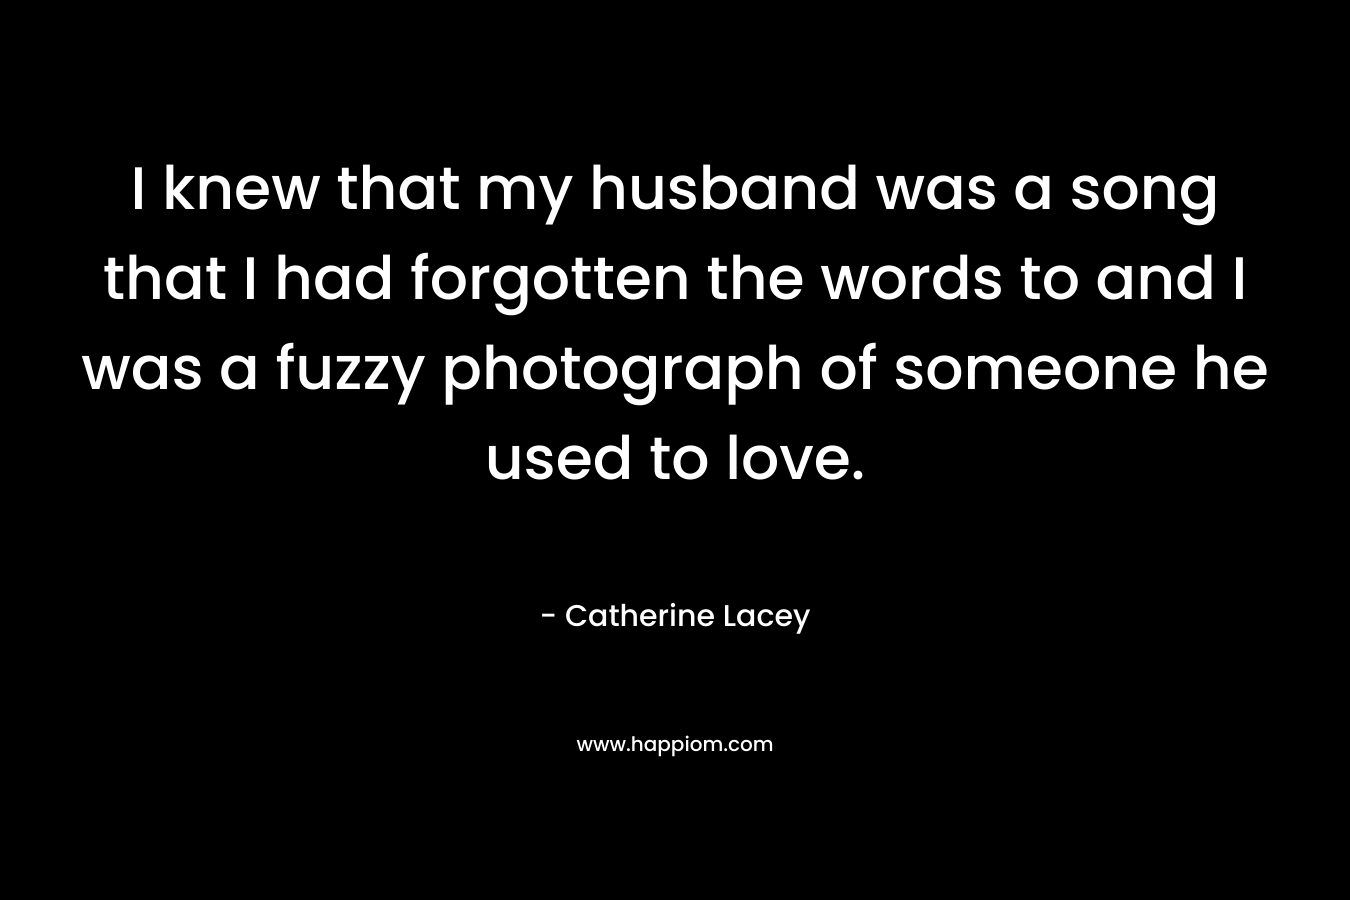 I knew that my husband was a song that I had forgotten the words to and I was a fuzzy photograph of someone he used to love. – Catherine Lacey